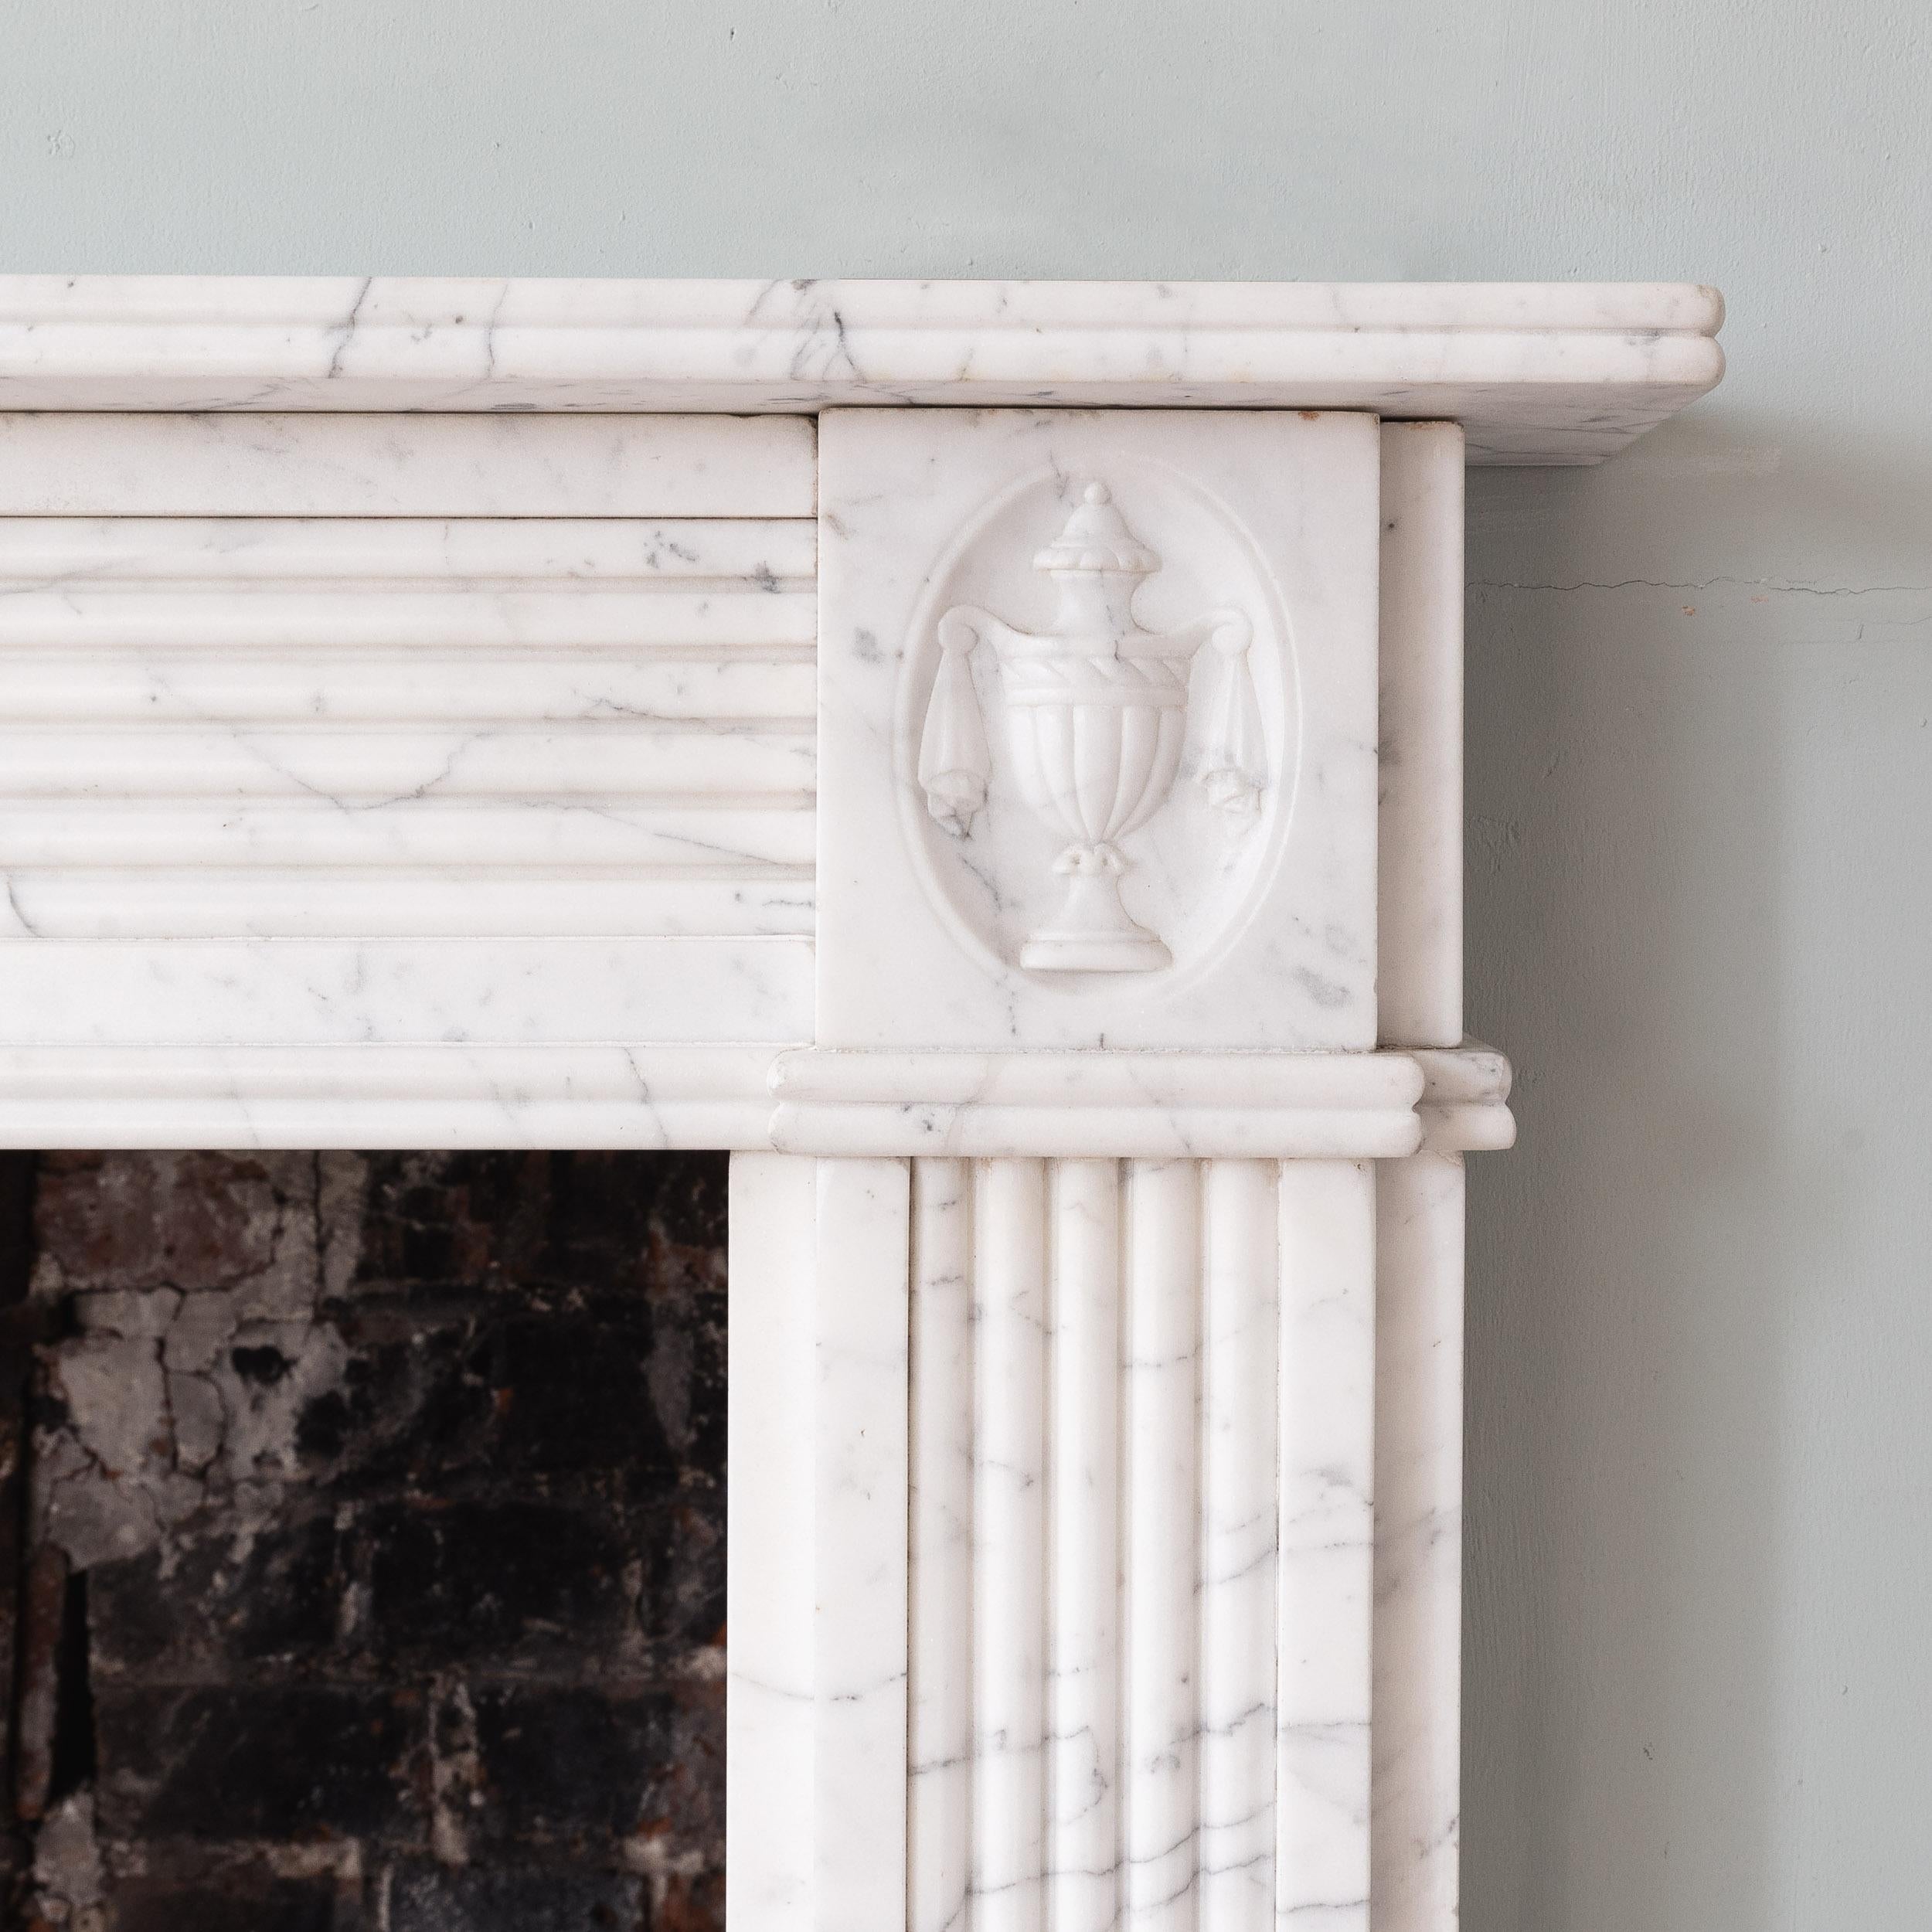 ‘Old English’ Regency Style Fireplace In Good Condition For Sale In London, GB